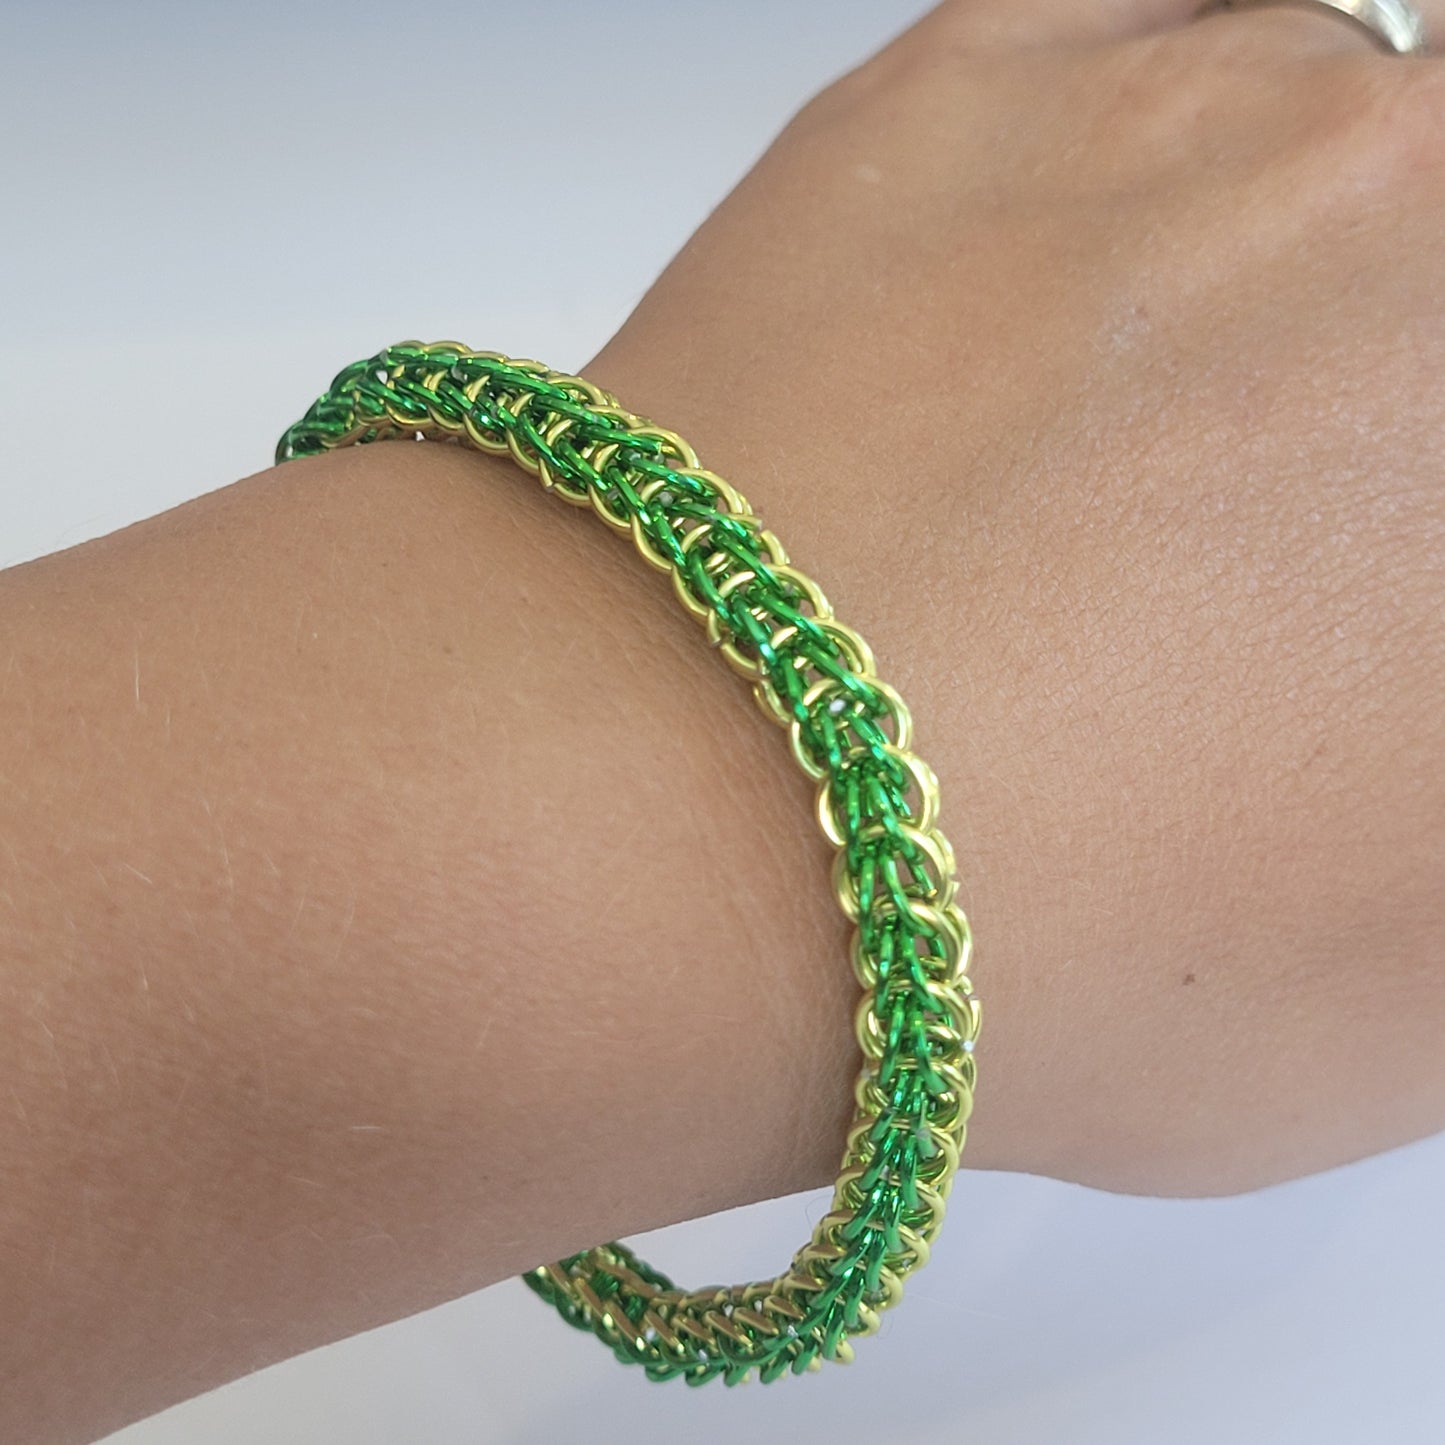 Bracelet, green and yellow chainmail